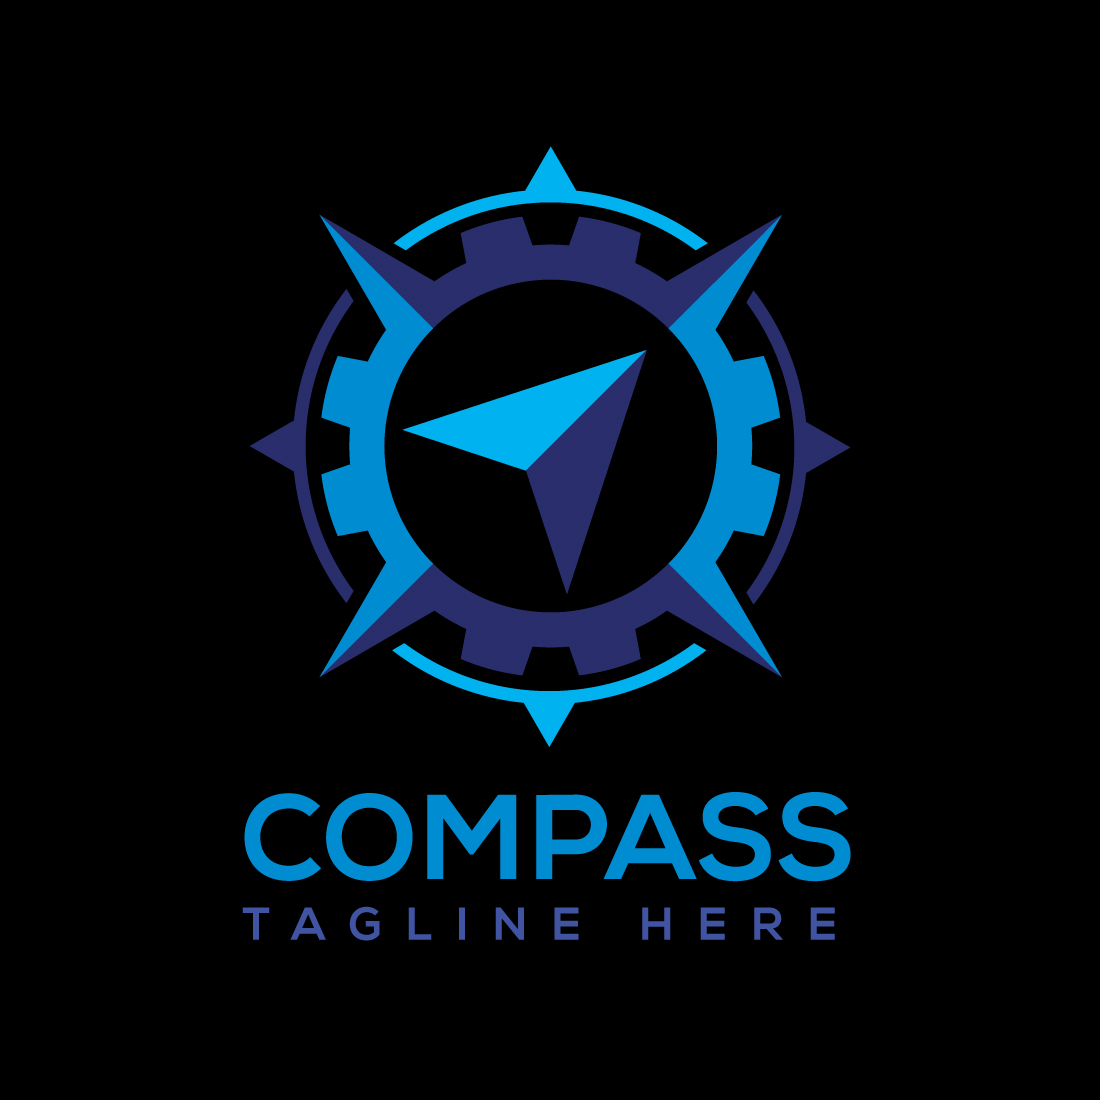 Gorgeous image of a round logo in the form of a compass on a black background.